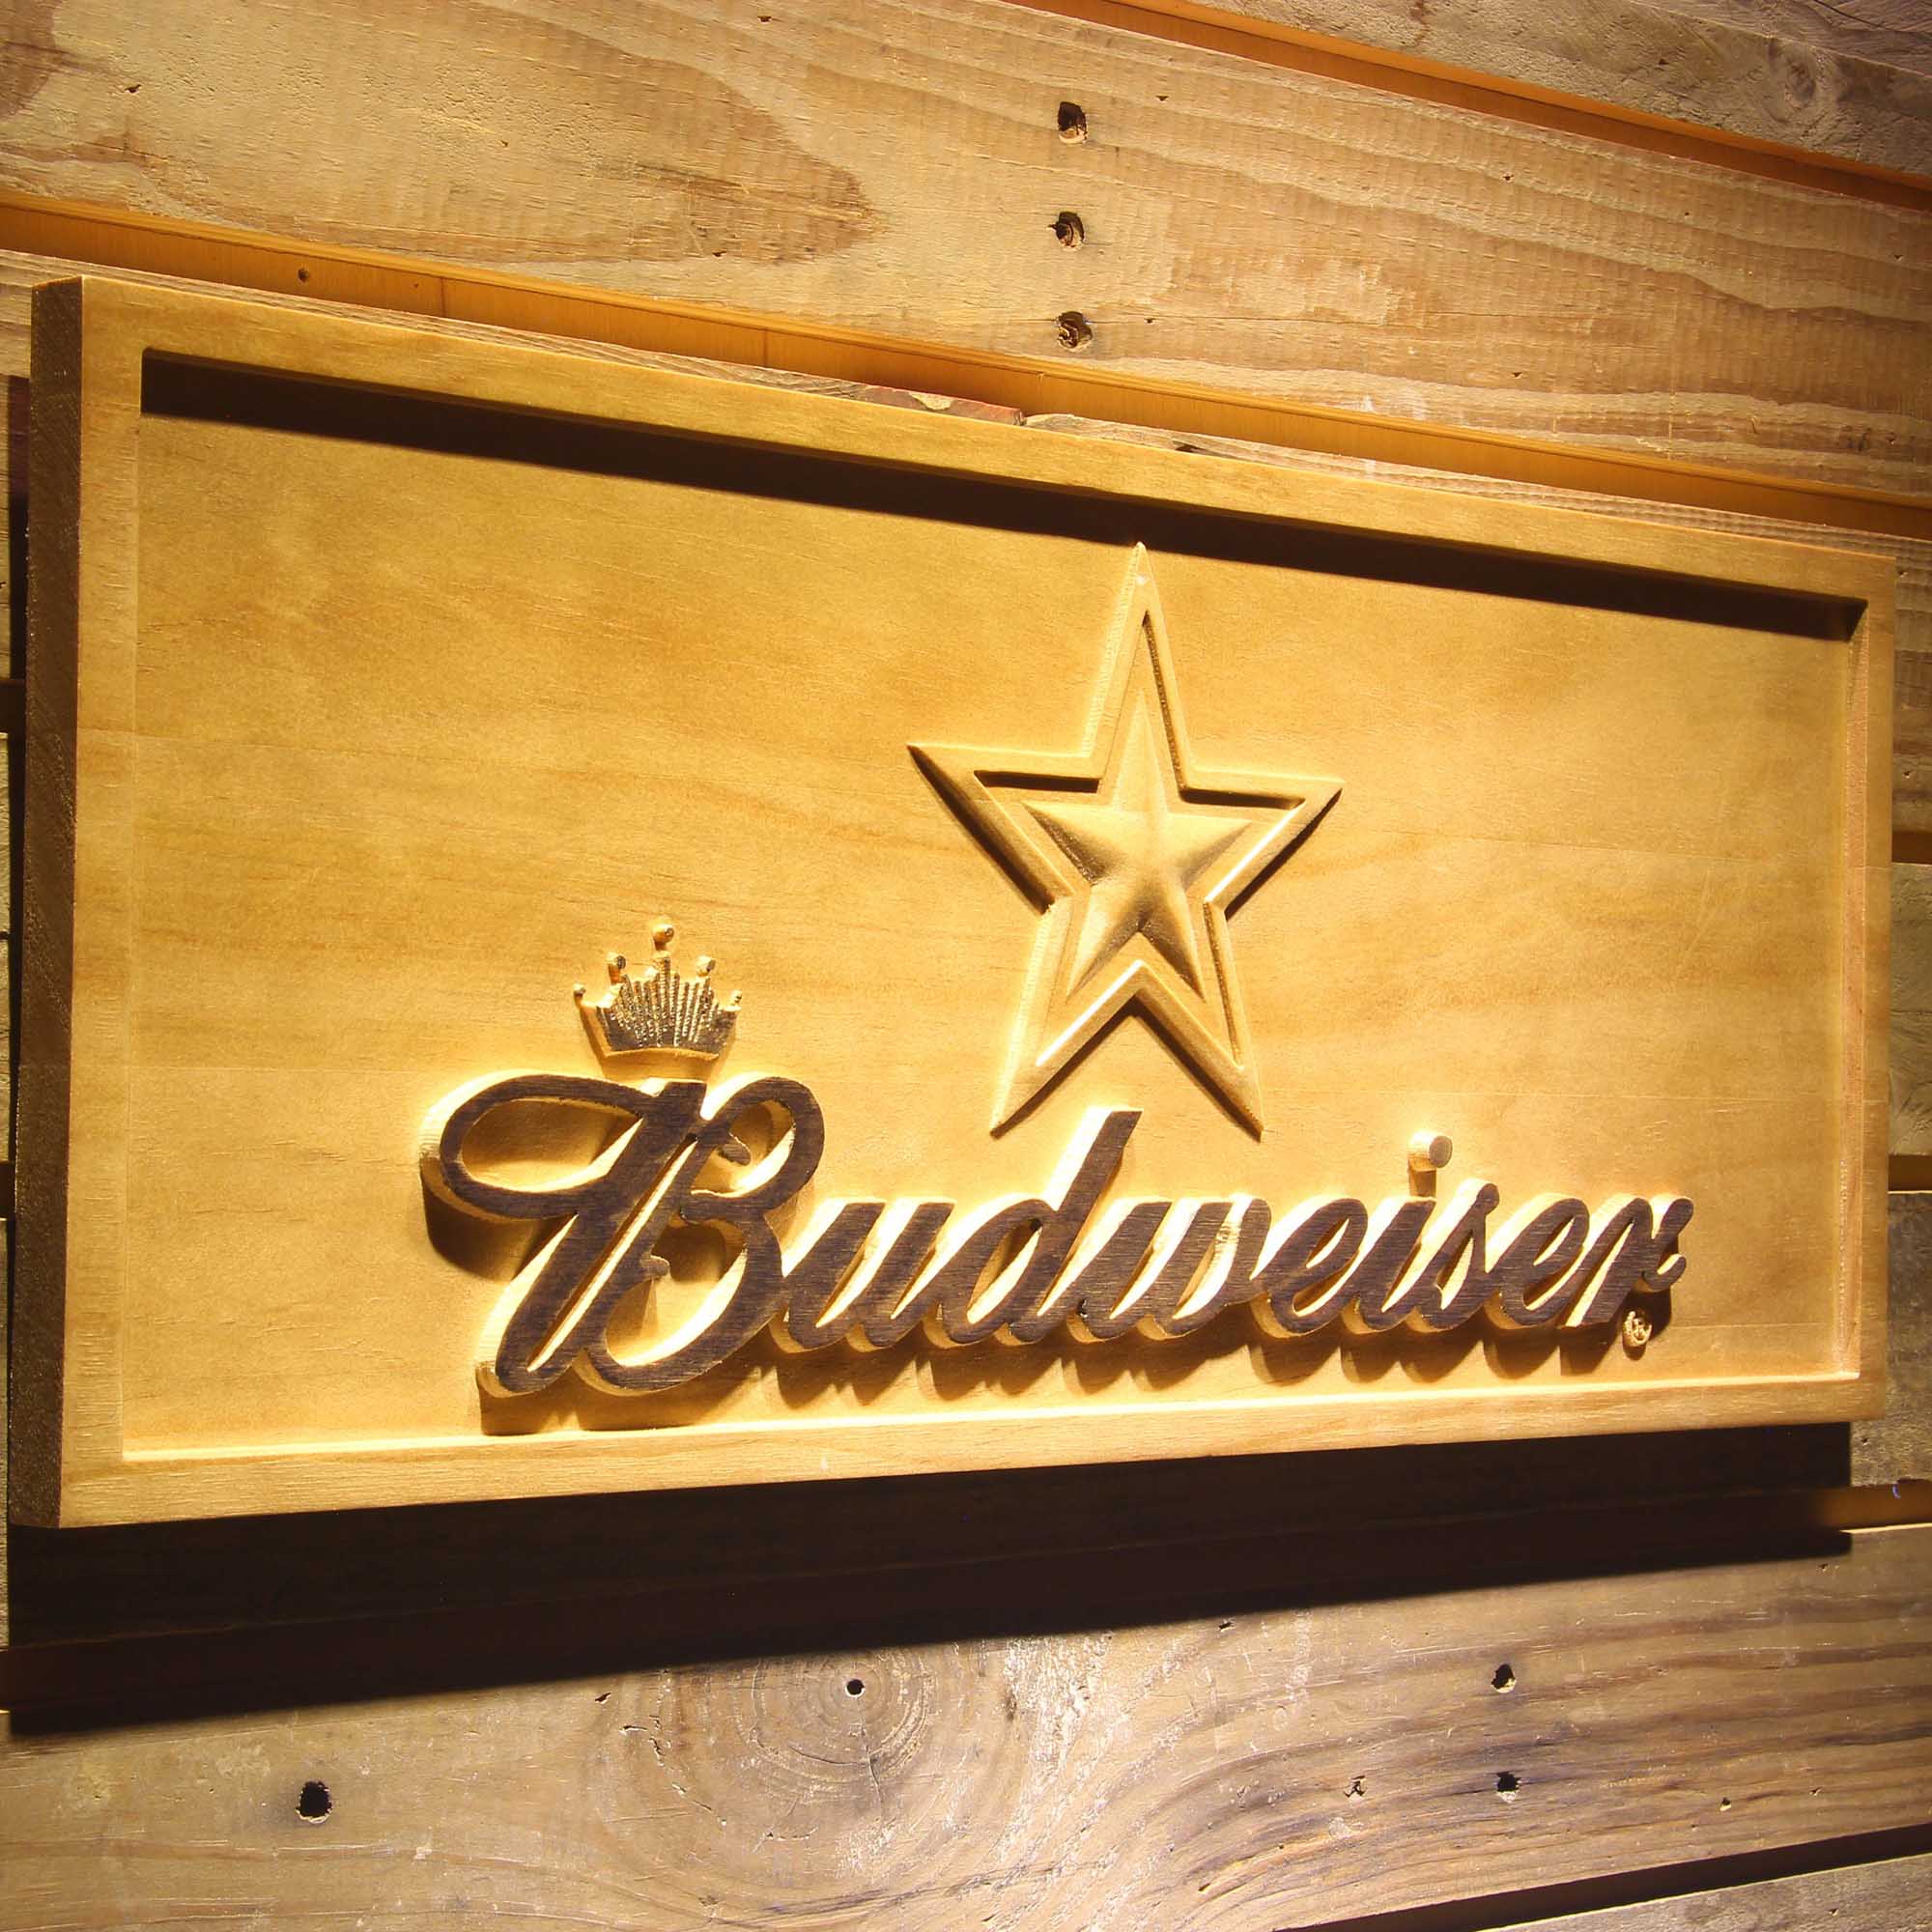 Dallas Cowboys Budweiser 3D Solid Wooden Craving Sign